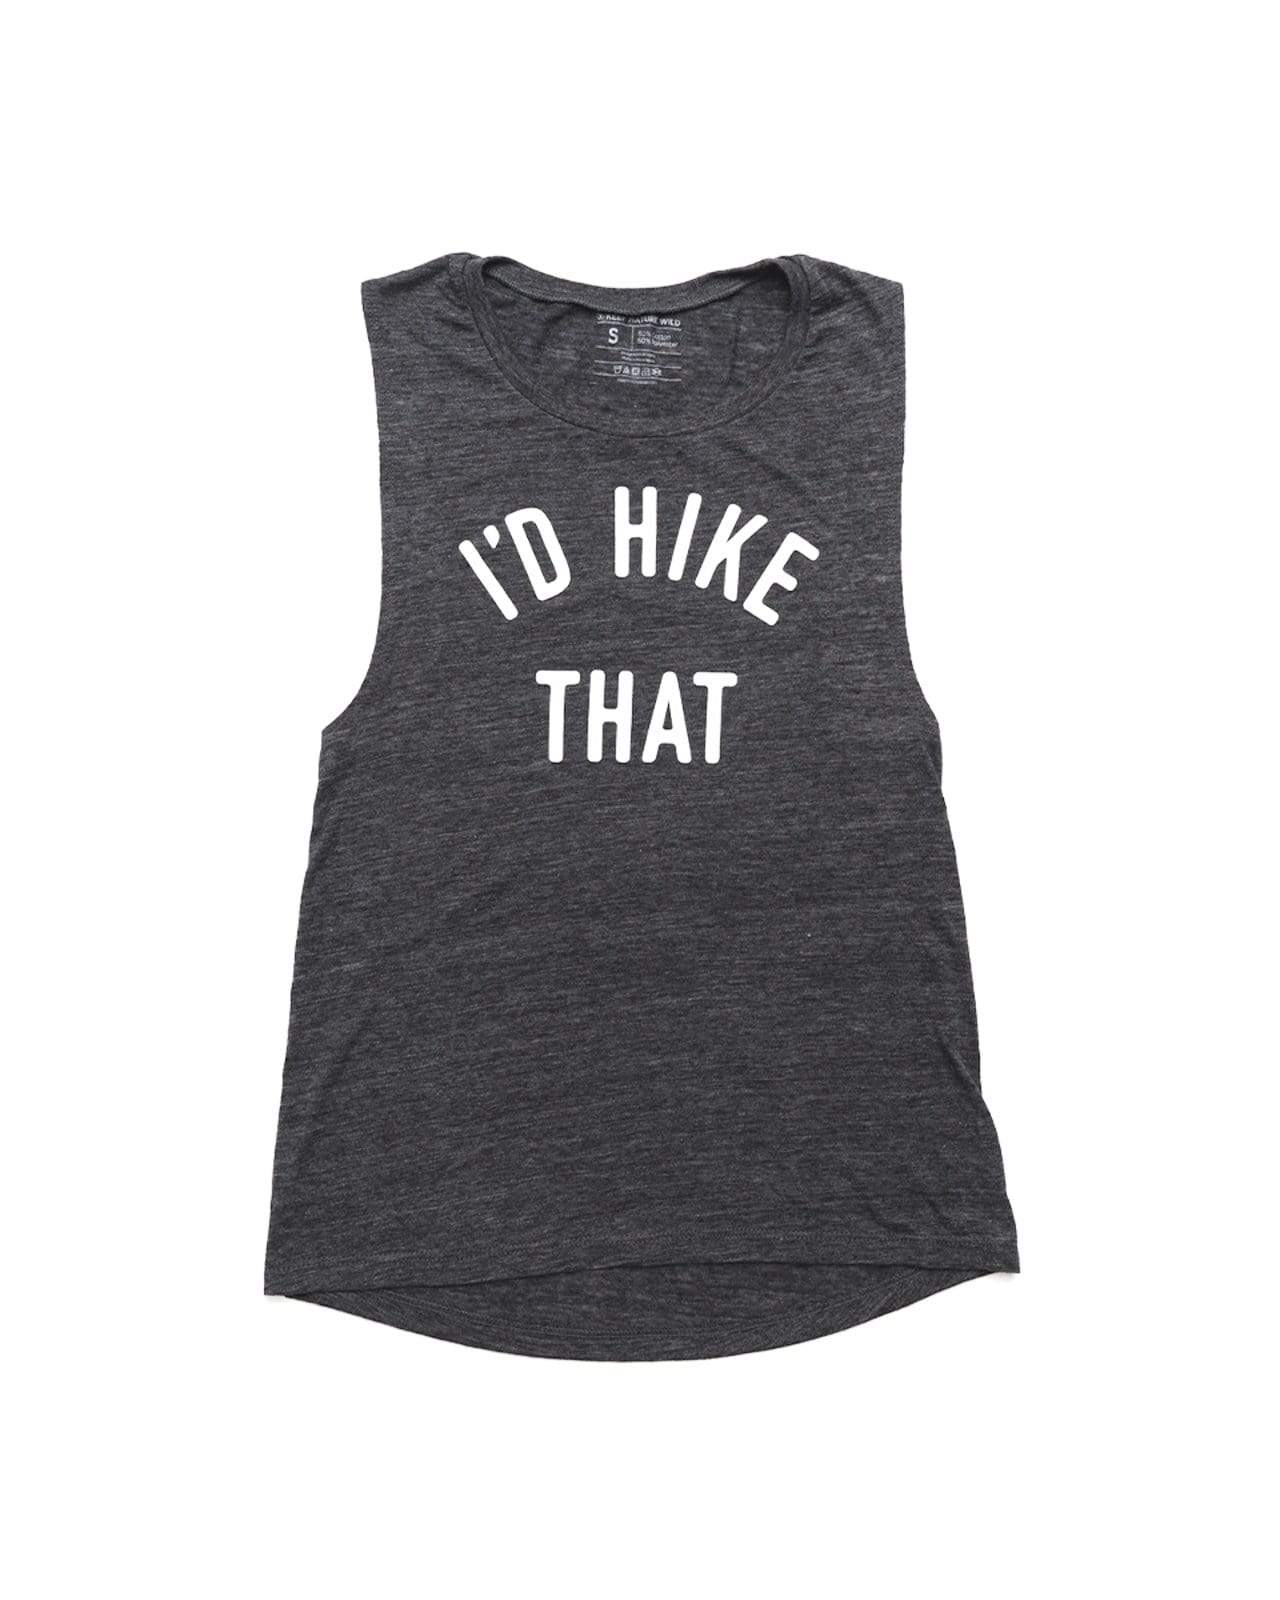 I'd Hike That Women's Muscle Tank | Charcoal Grey - Keep Nature Wild